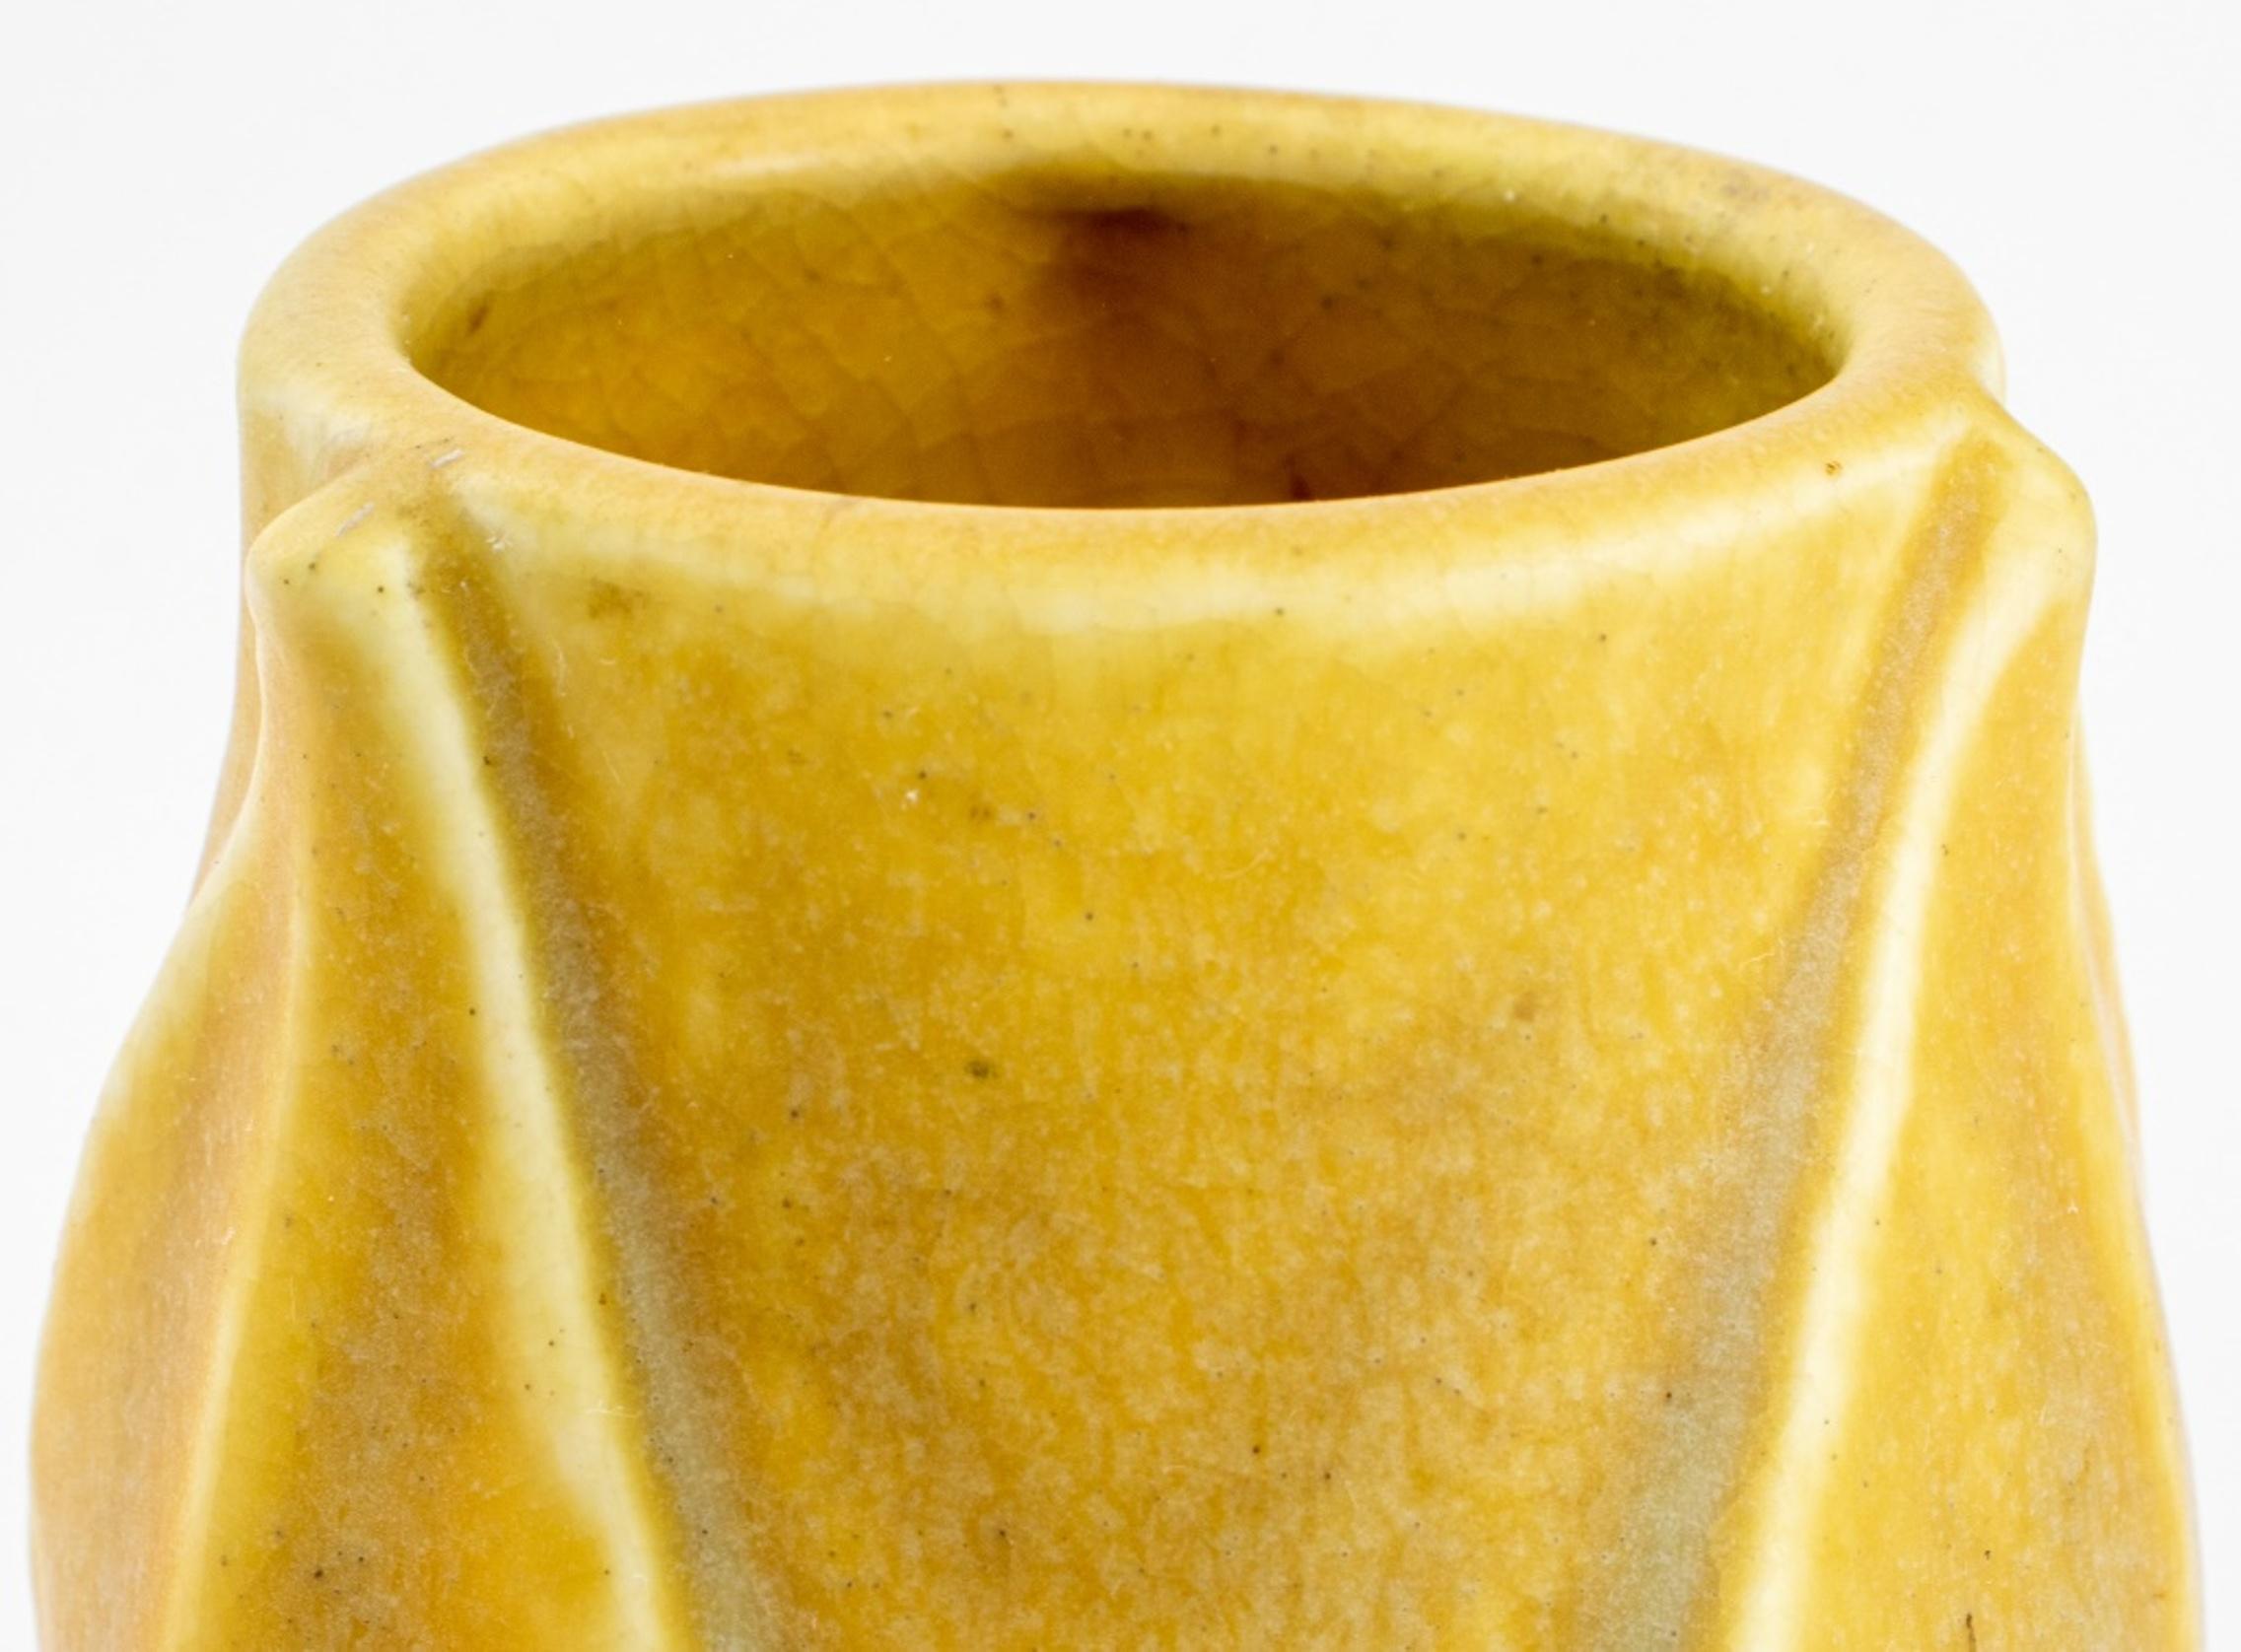 Rookwood Art Pottery vase, with impressed marks for Rookwood, date marks for 1917, and model number 2381, an ochre glazed elongated floriform with petals. 

Dimensions: 6.75